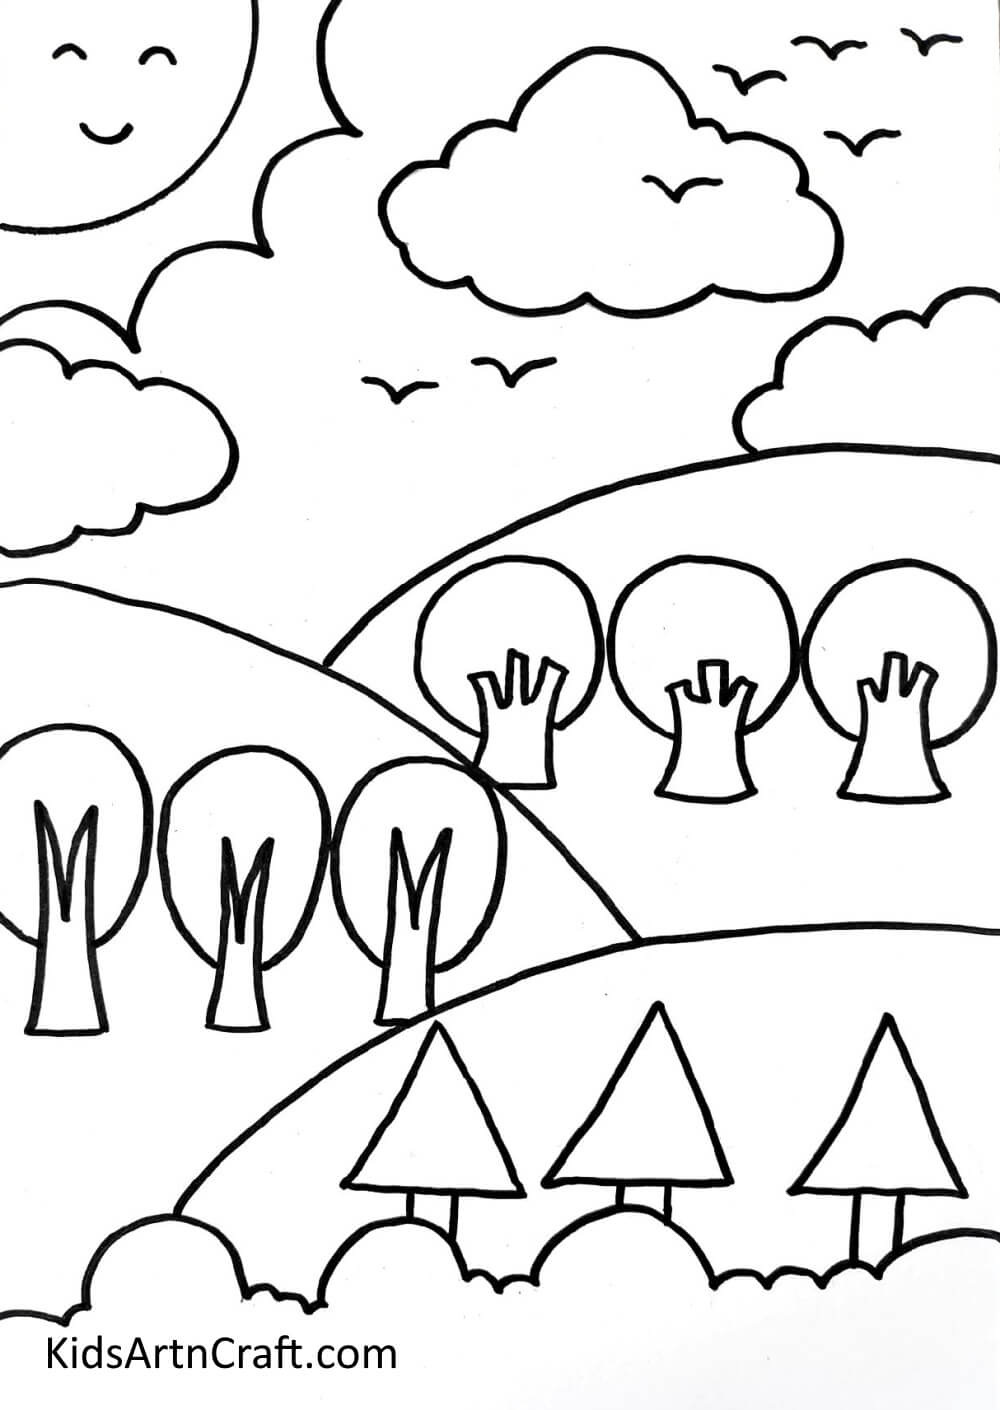 Draw The Sun, Clouds, And Birds - Guide on Drawing a Landscape for Youngsters